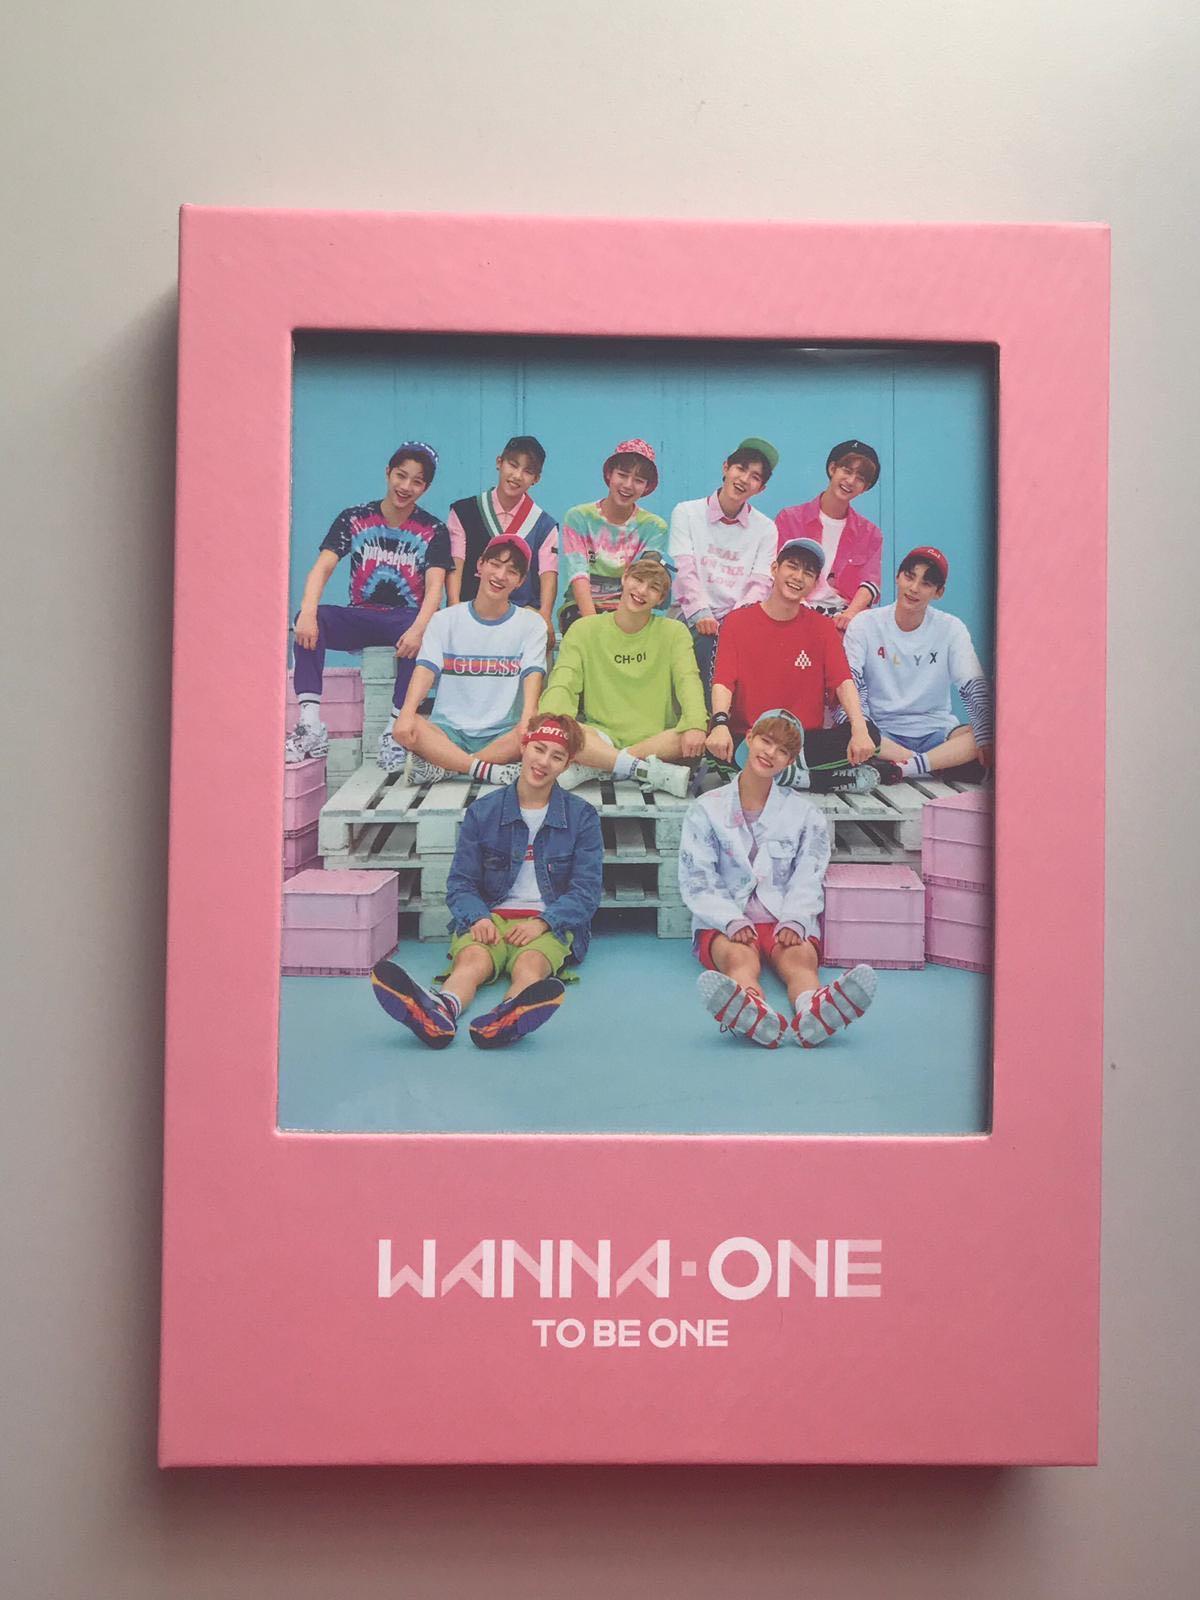 Wanna One 1x1 1 To Be One Album Pink Ver Entertainment K Wave On Carousell